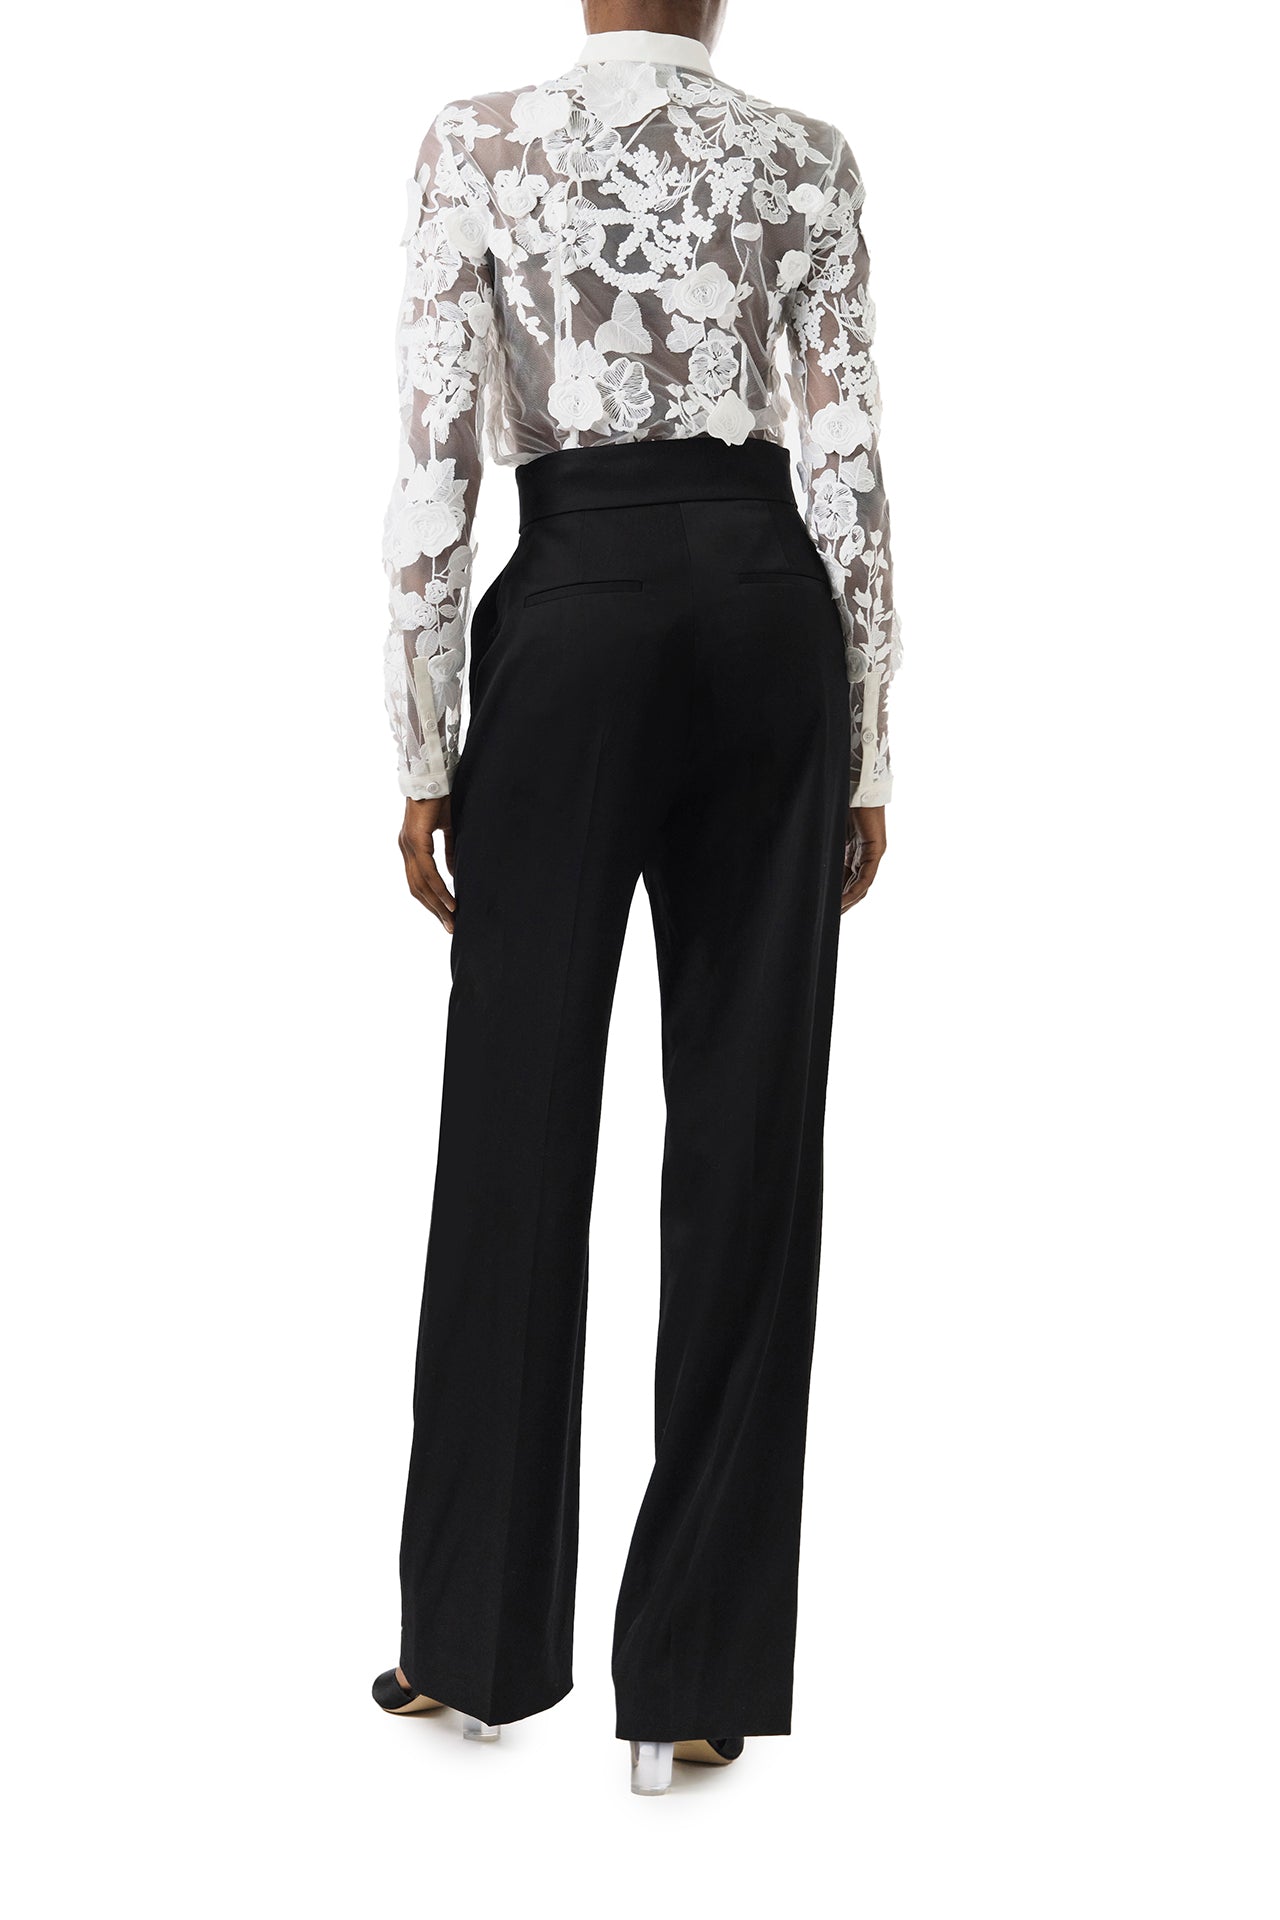 Monique Lhuillier Fall 2024 button front sheer lace blouse in Silk White 3D lace - back.